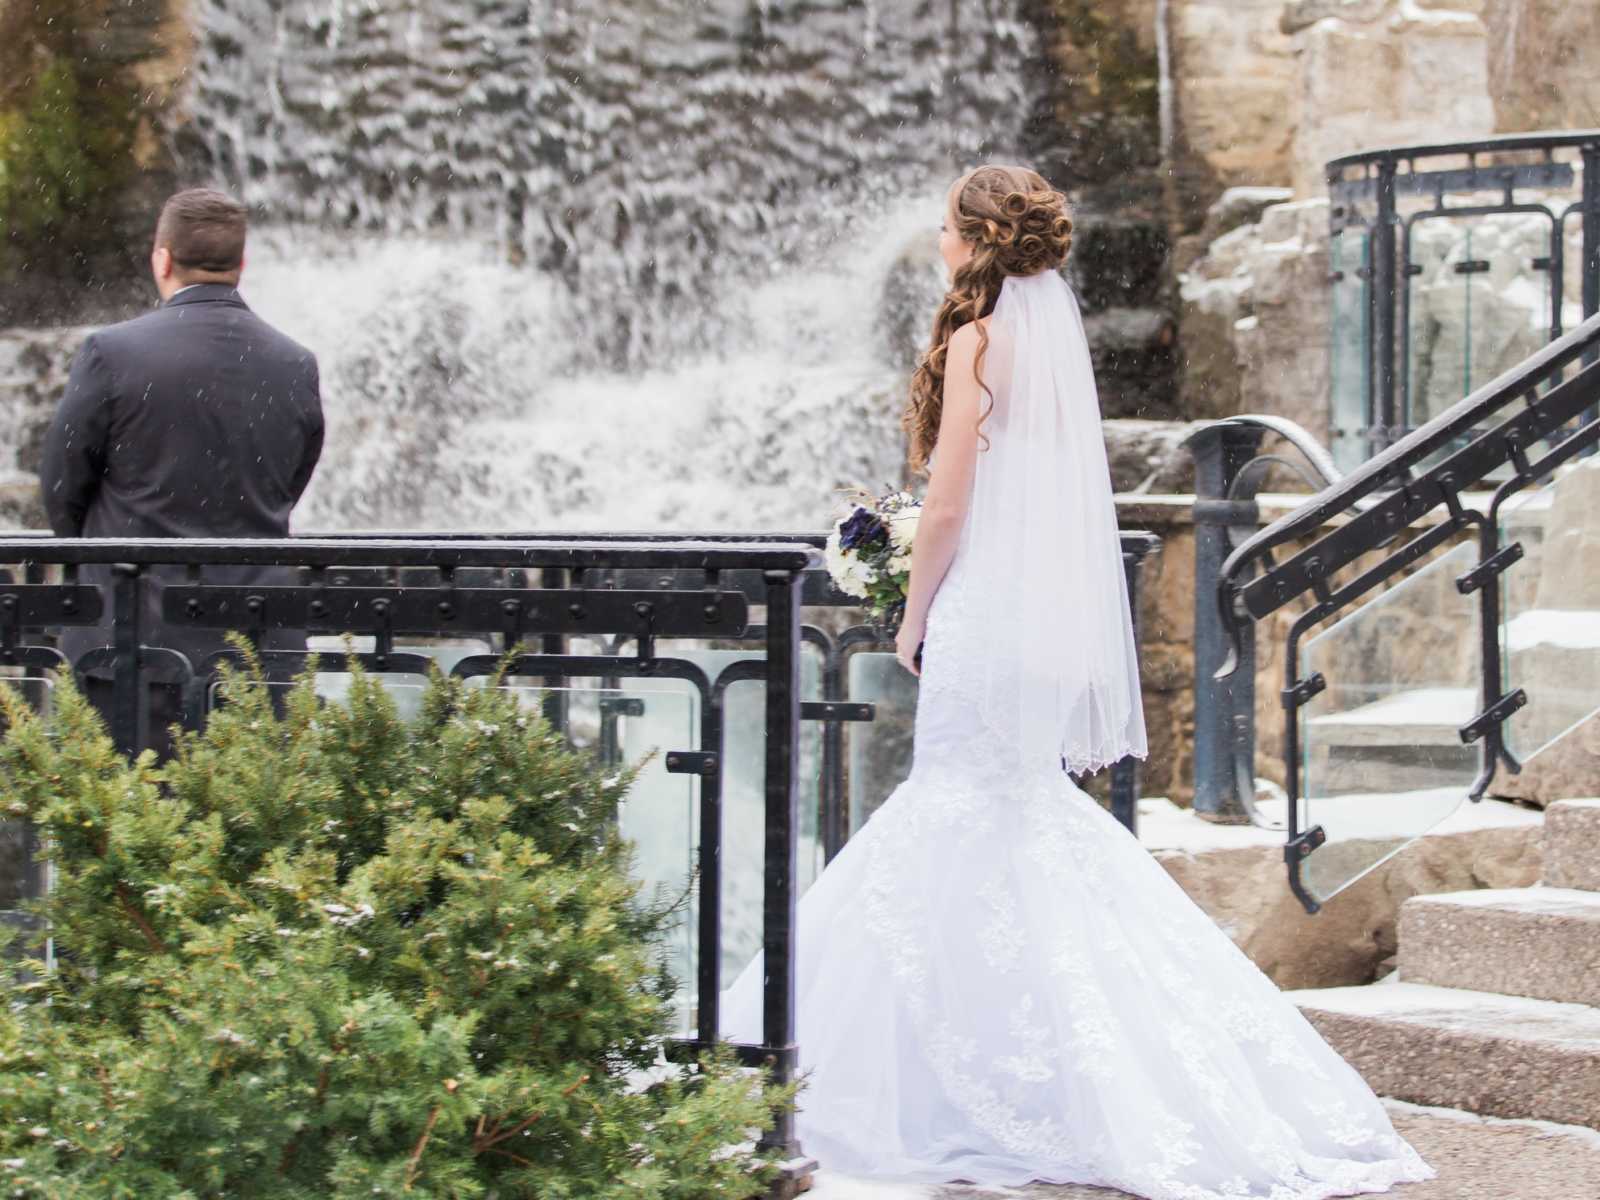 bride in wedding dress staring at back of the groom who is standing on a bridge next to a waterfall